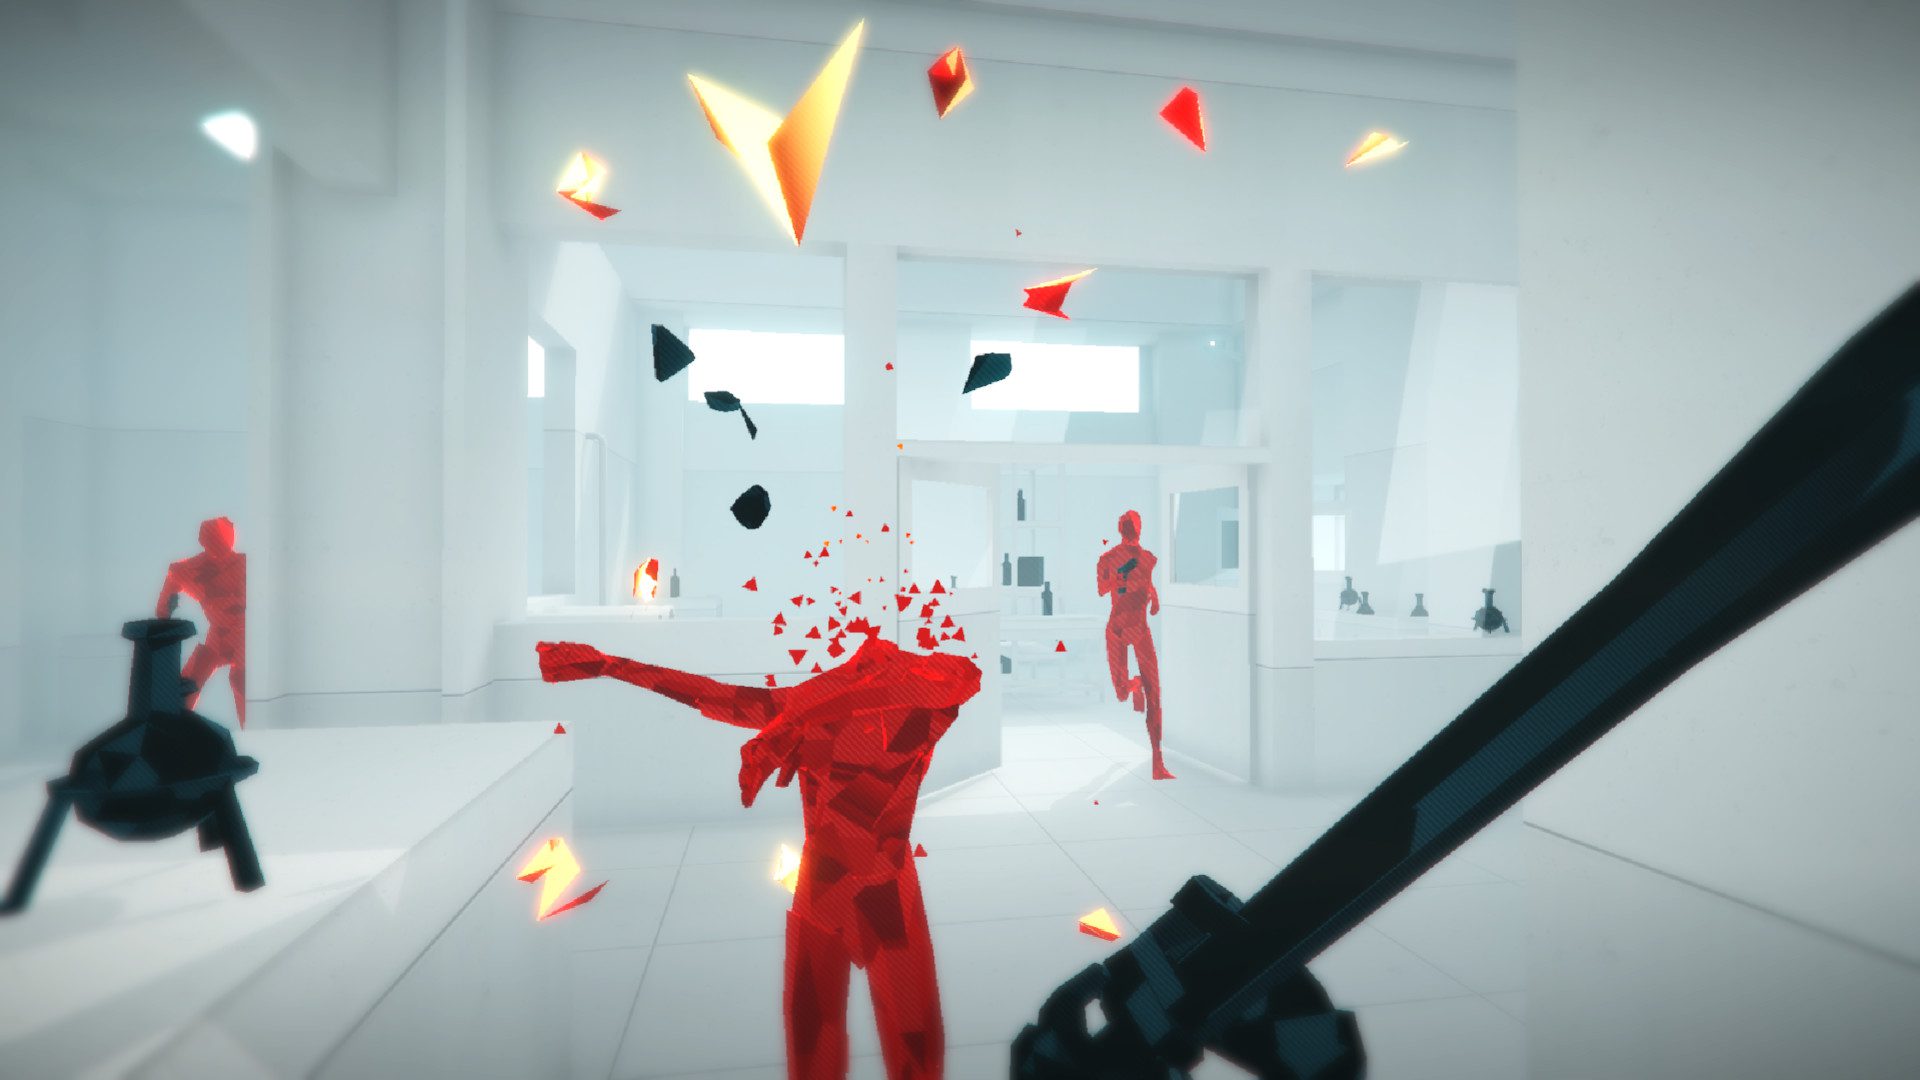 March's Games with Gold include Trials of the Blood Dragon and SUPERHOT